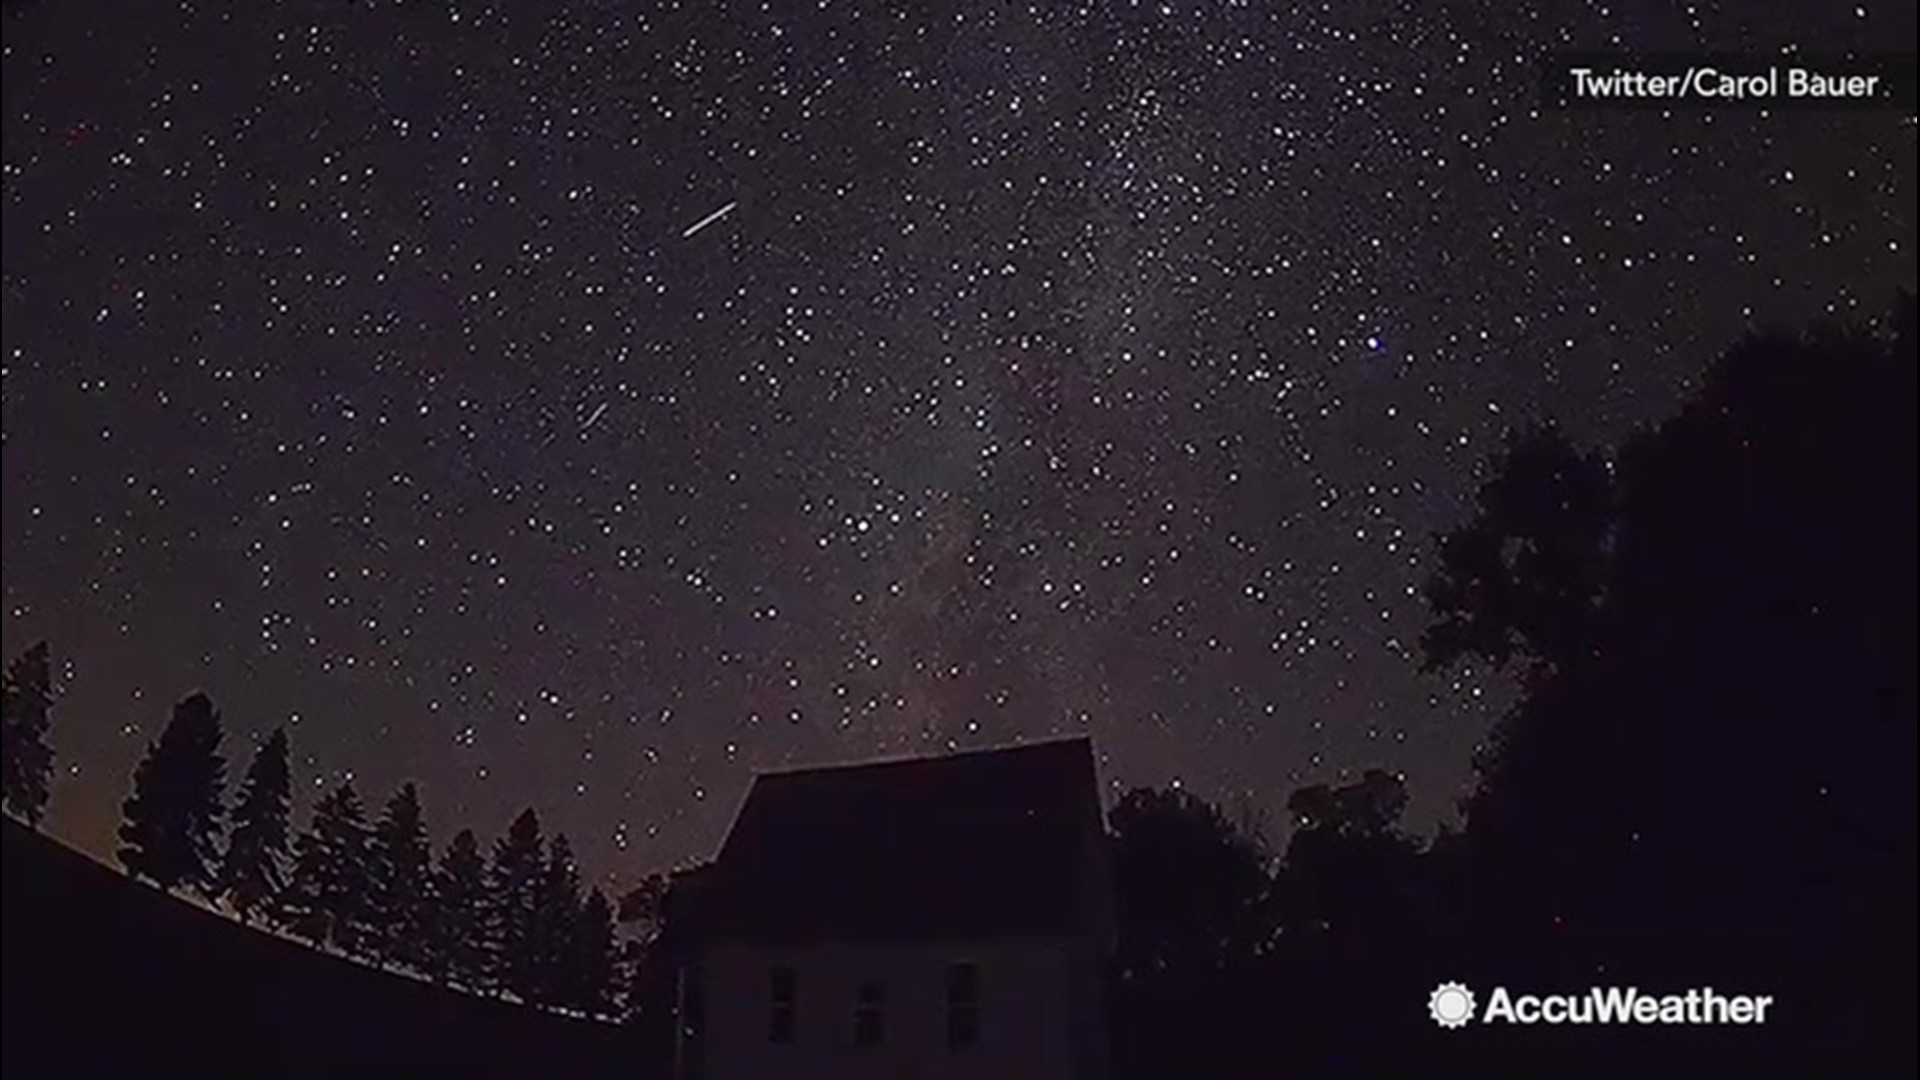 The night of July 29-30 was the peak of the Southern Delta Aquarid and Alpha Capricornid meteor showers.  Peak showers had a combined rate of 25 meteors per hour.  This night sky timelapse featuring some meteors was shot in Graceville, Minnesota in the early morning of July 30.